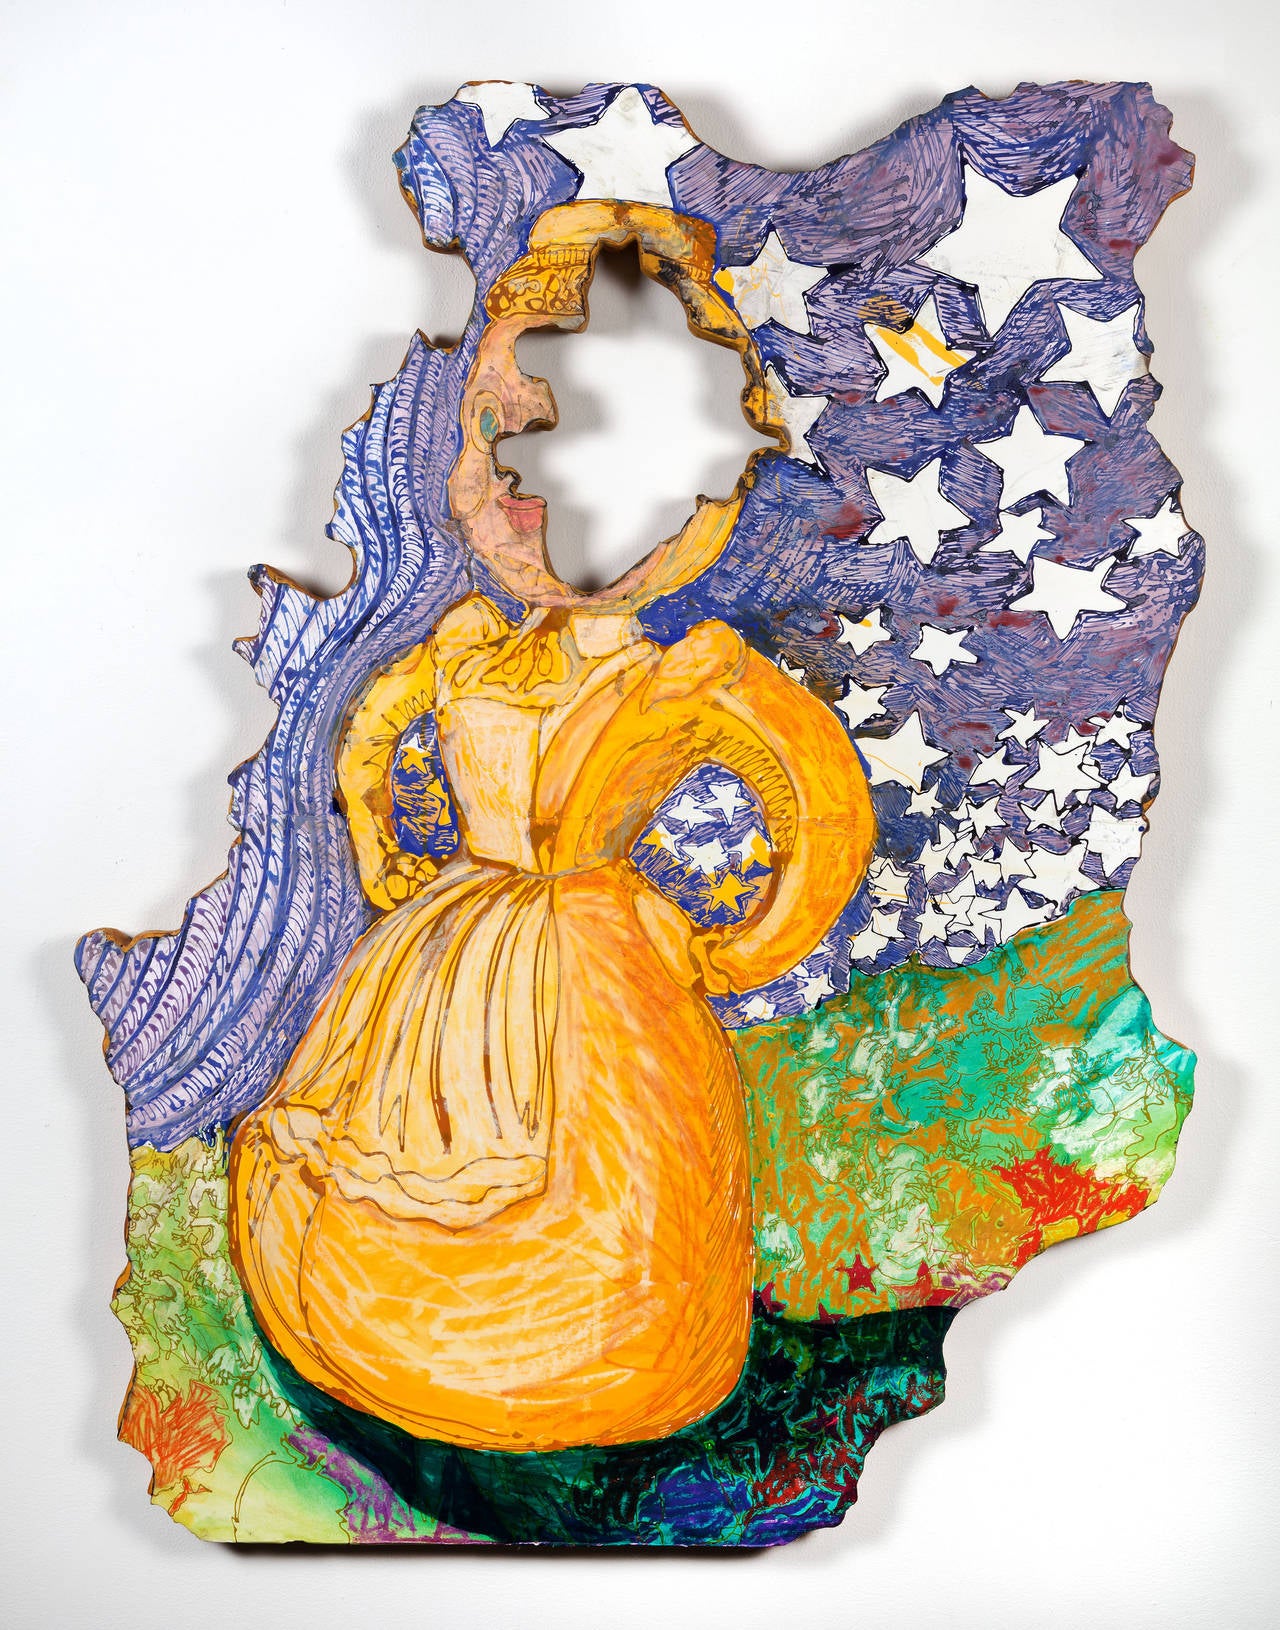 Stars Fell on Little Yellow Miss - Painting by Gina Phillips